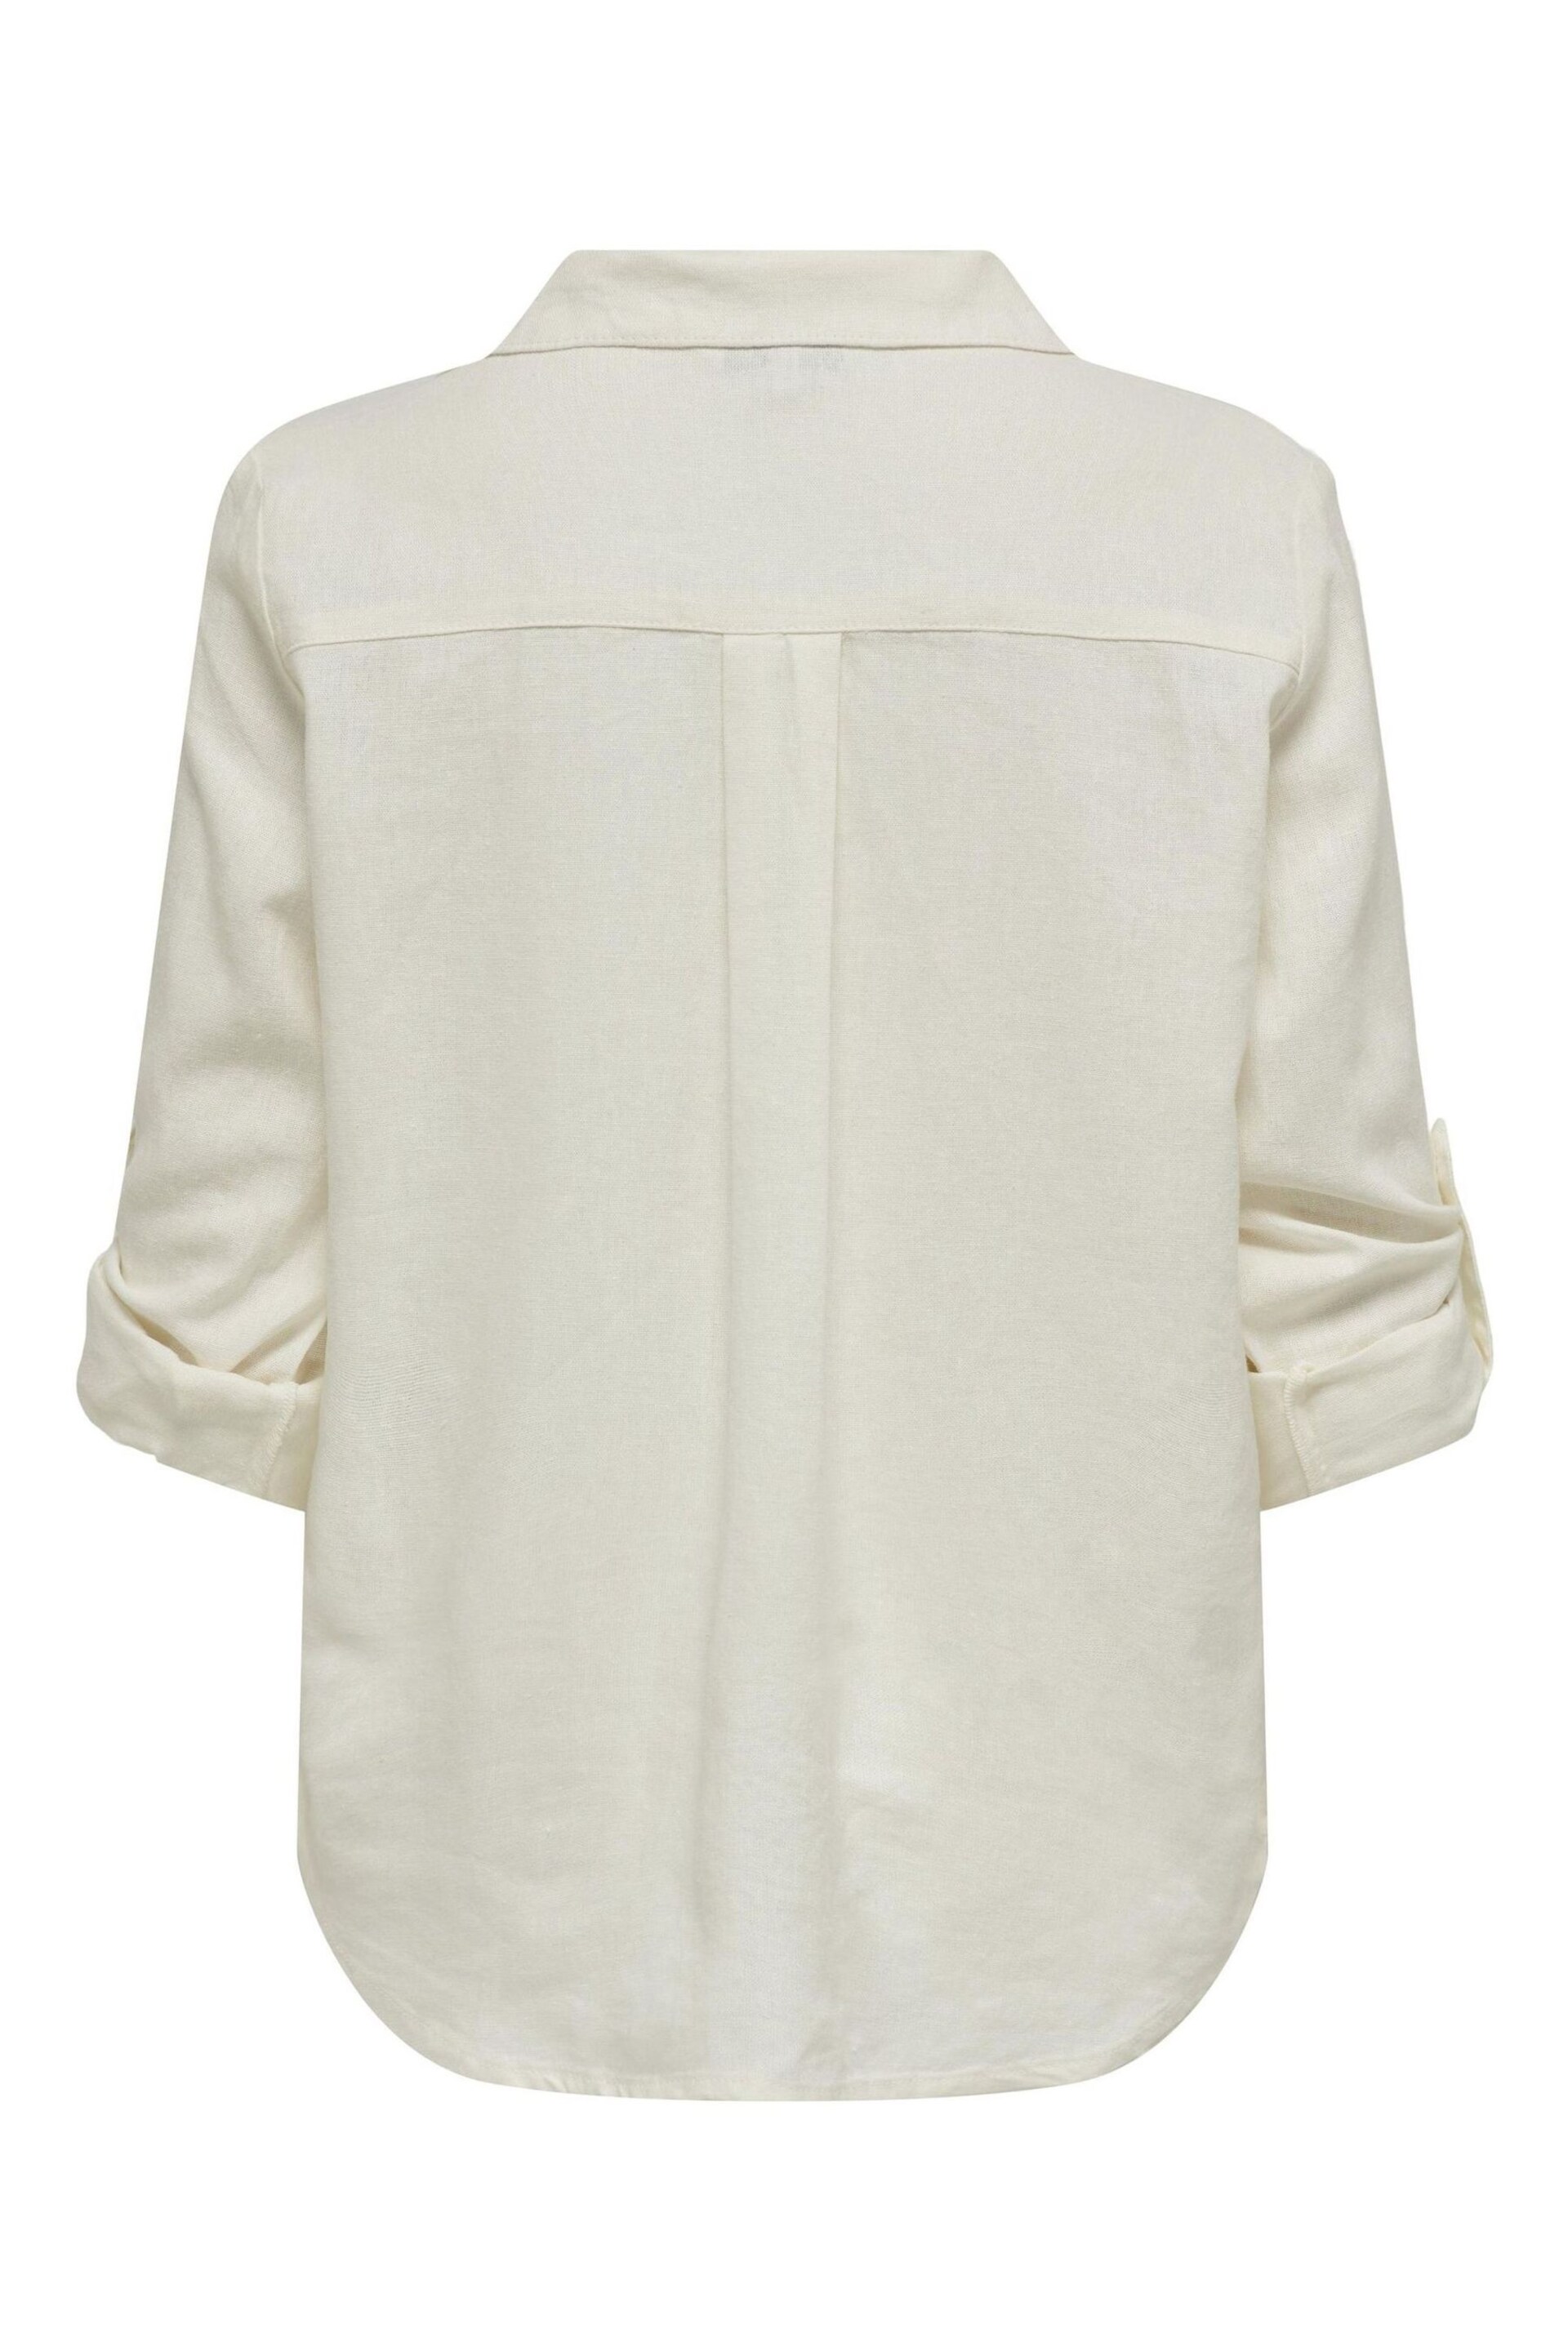 ONLY White Utility Cargo Pocket Detail Shirt - Image 6 of 6